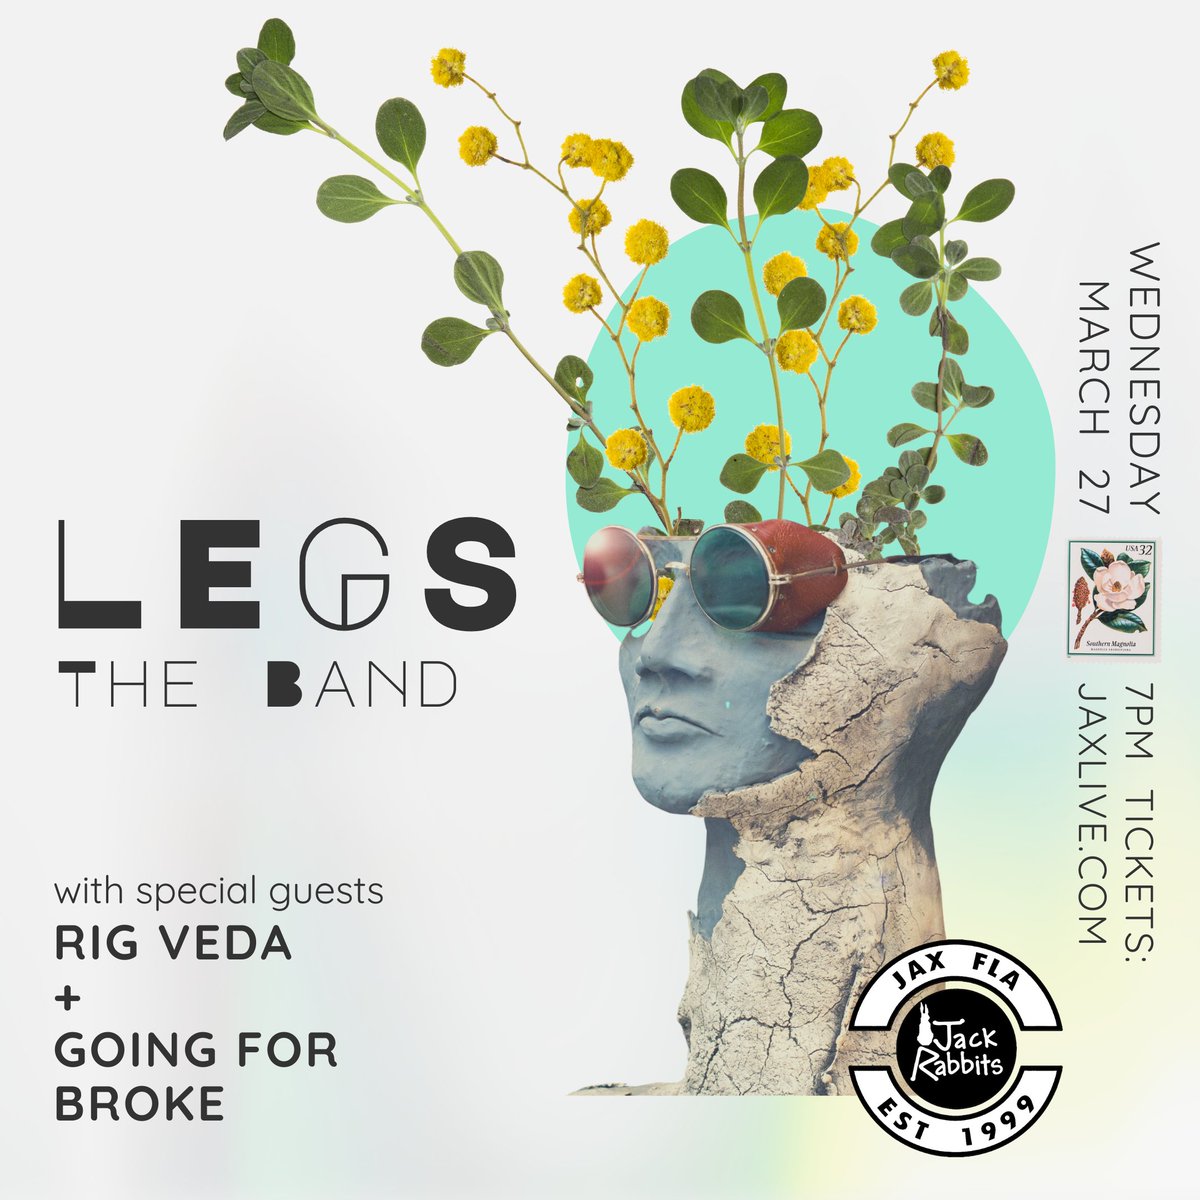 #LegsTheBand #RigVeda #GoingForBroke #LiveMusic #IndieBands  TOMORROW night see LEGS. The Band, Rig Veda, & Going For Broke at JACK RABBITS, tickets are onsale now at this link jaxlive.com/event/legs-the…